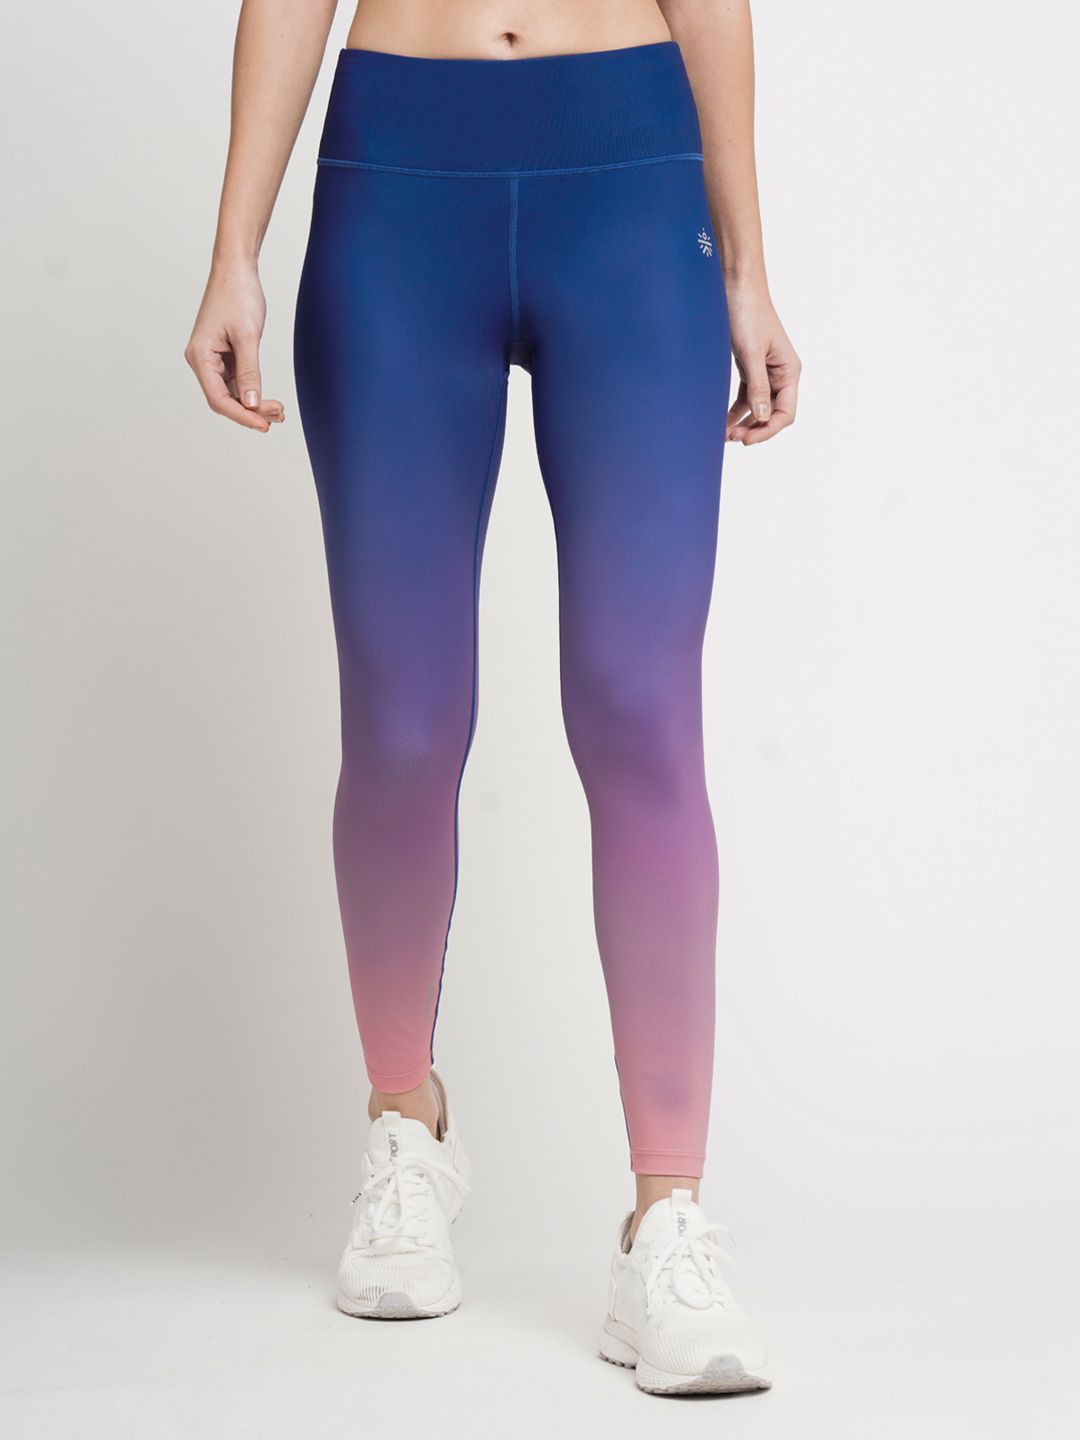 Cultsport Women Navy Blue & Pink Printed Tights Price in India